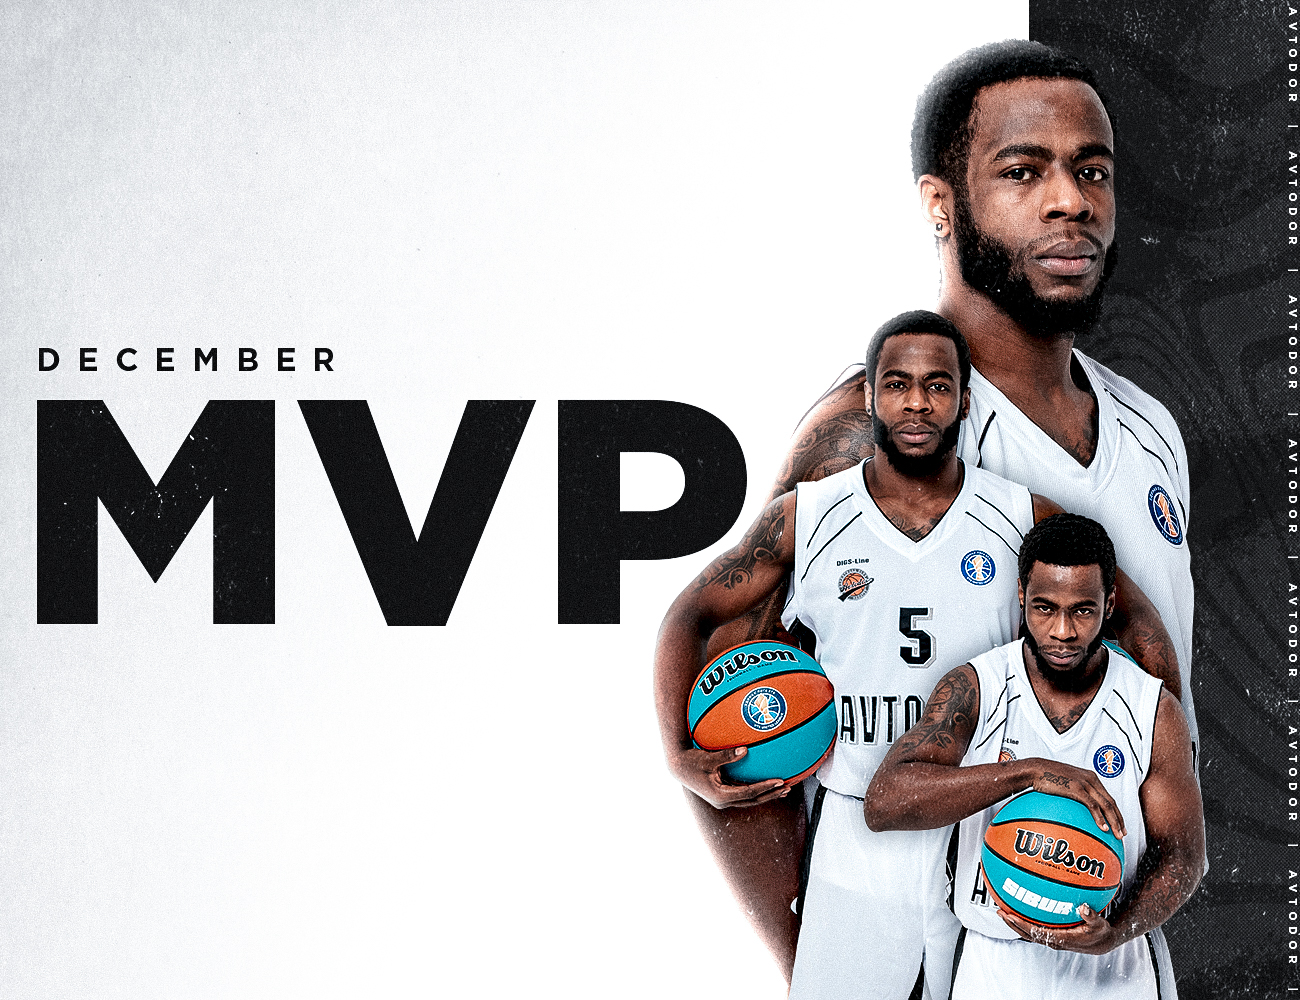 Kenny Chery is the MVP of December